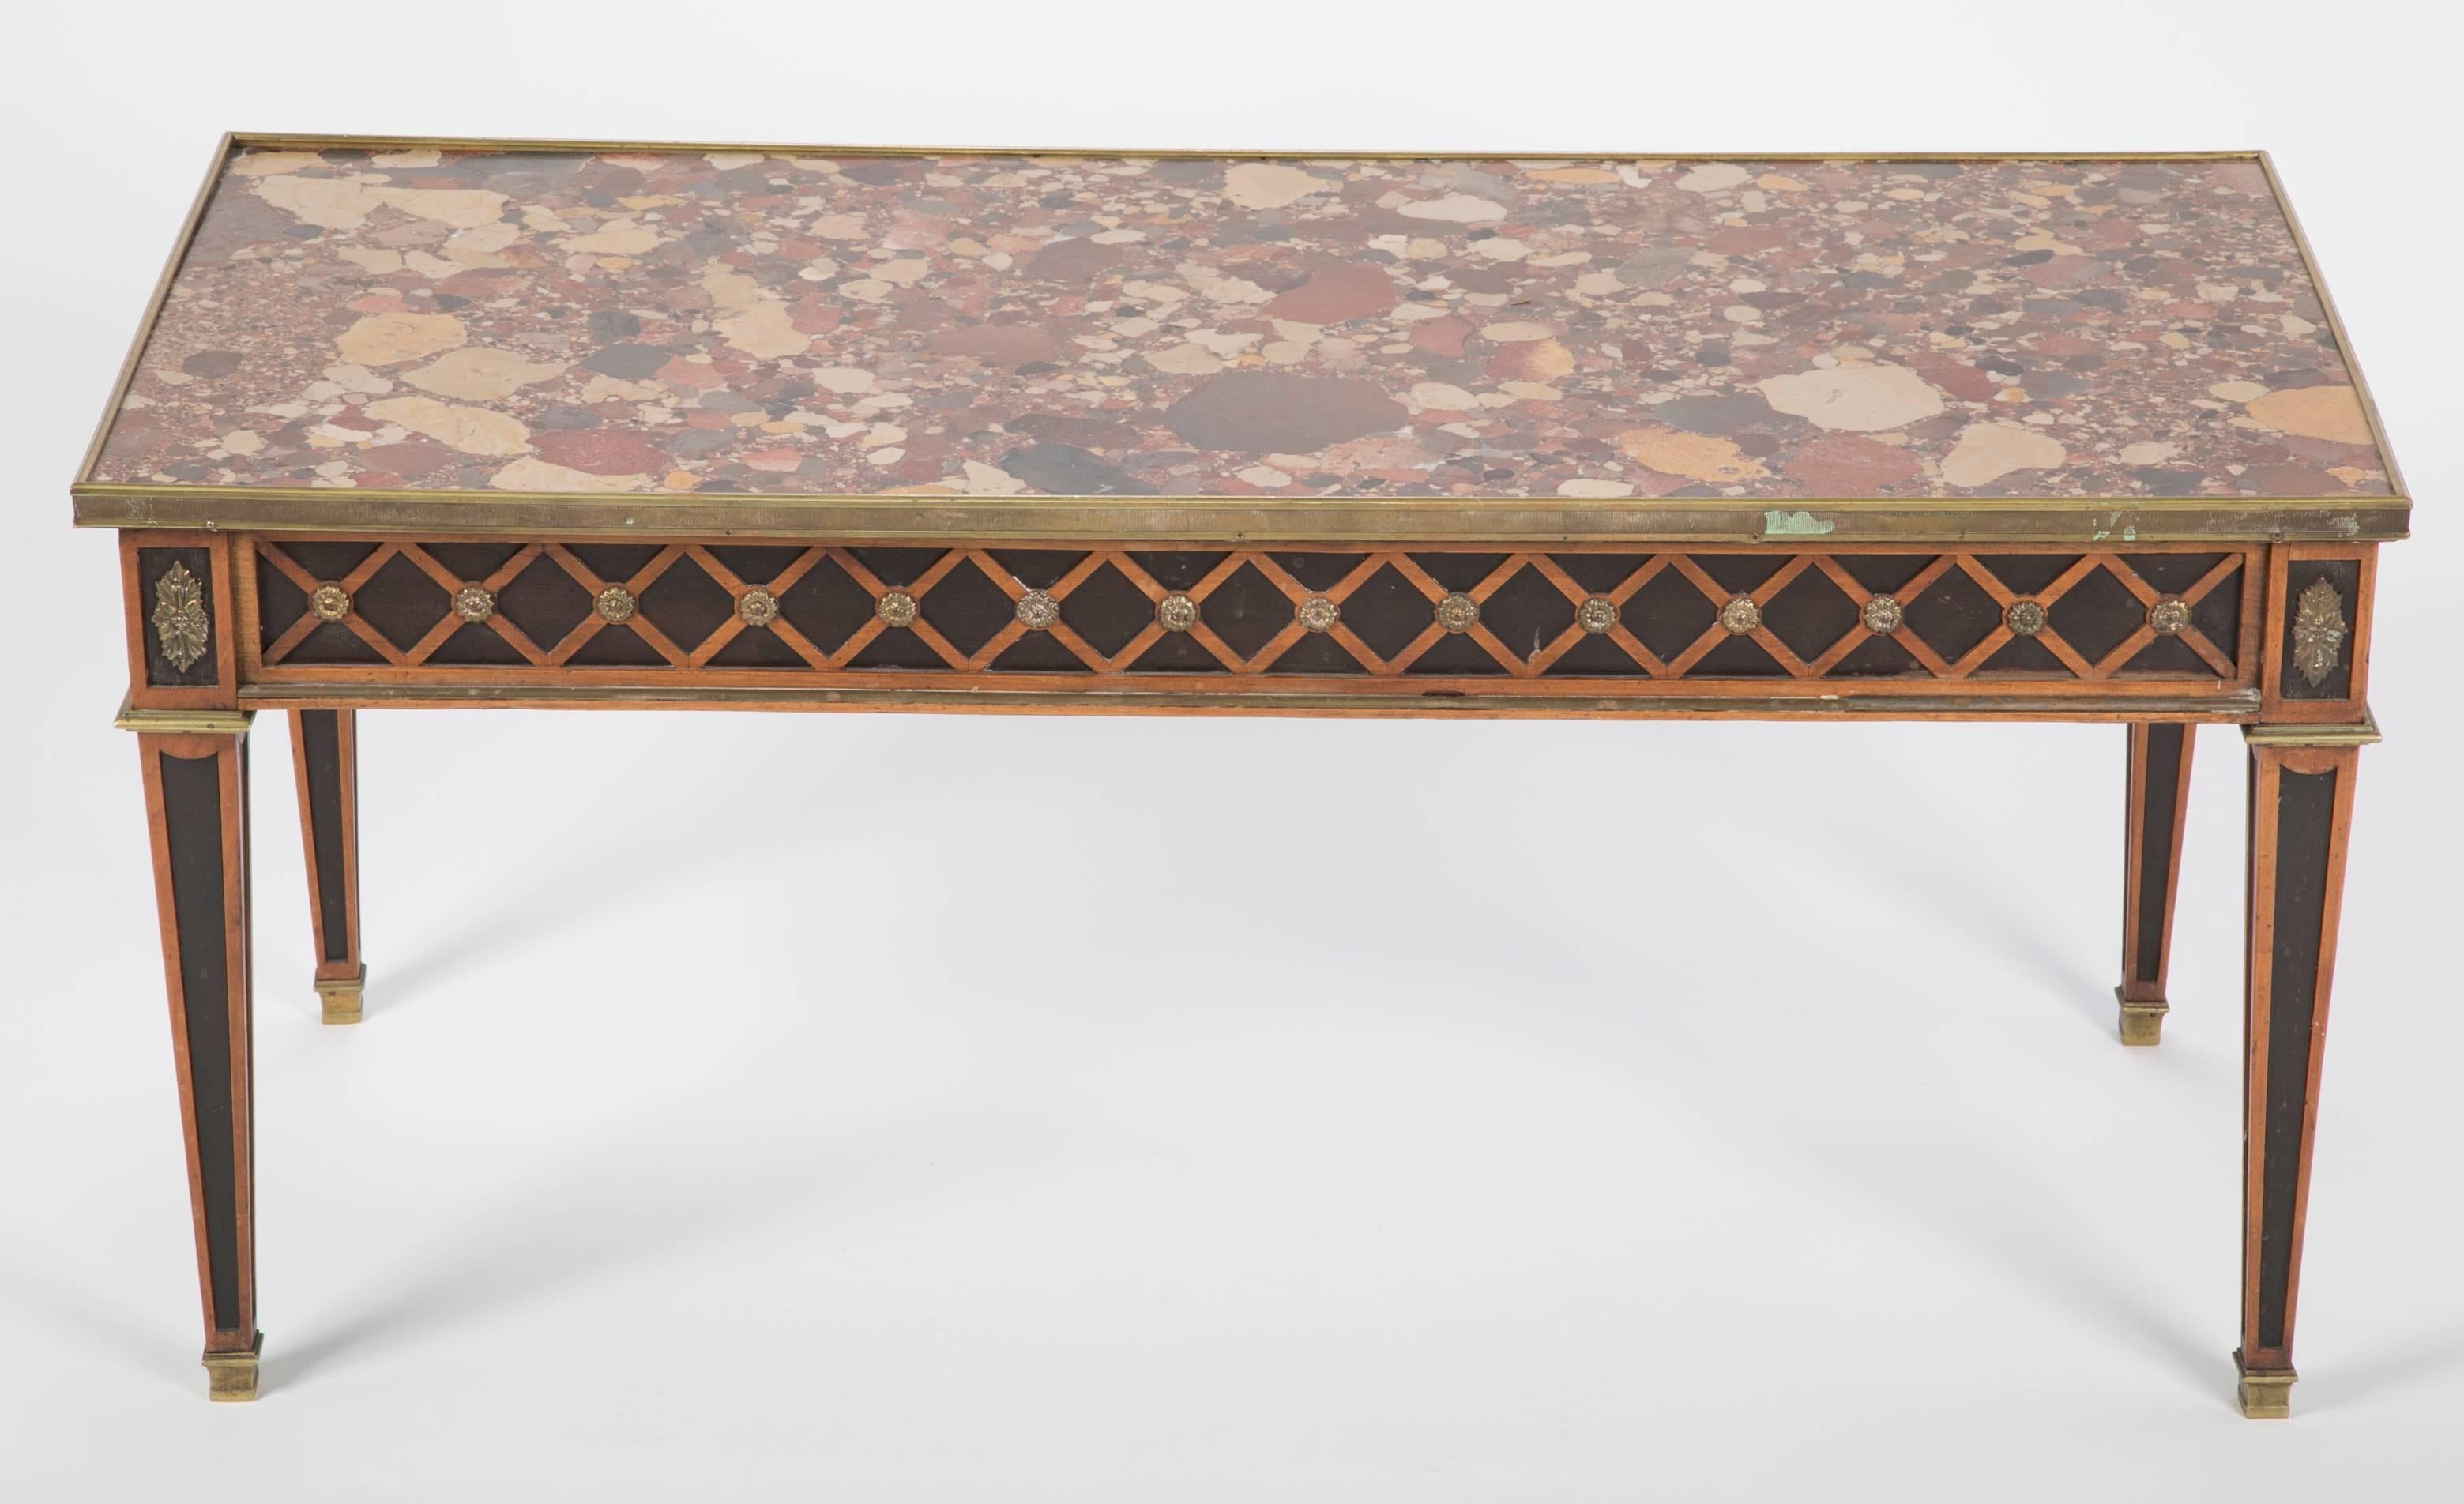 Elegant French Louis XVI style coffee table custom made by Jansen with bronze contour and ornaments, very fine brèche d’Alep marble top and lozenge pattern marquetry  

Provenance: documented 998 Fifth Avenue, NY residence.

